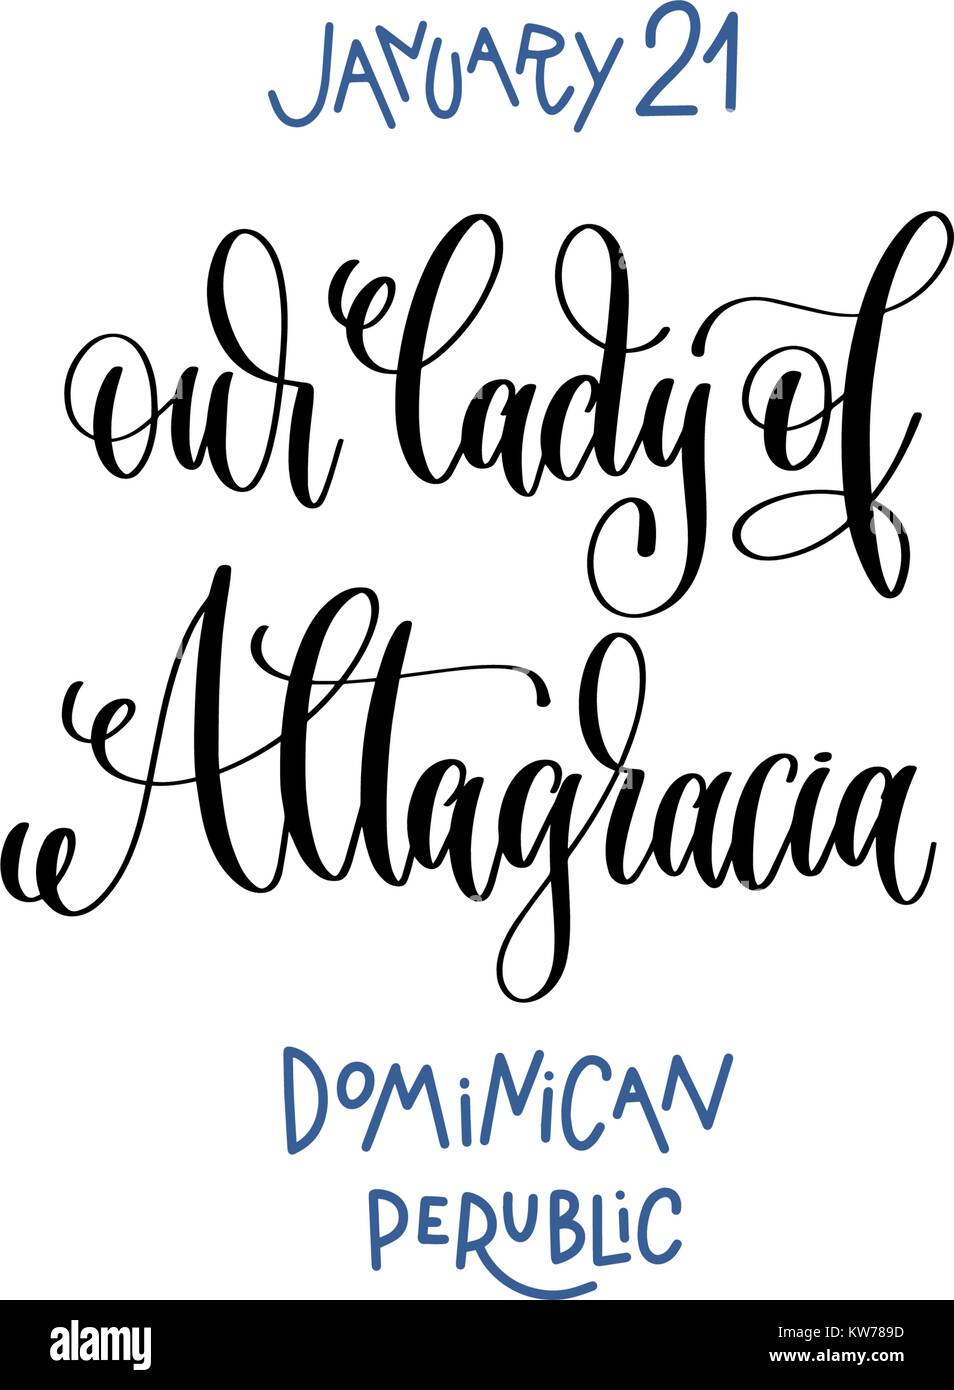 january 21 - our lady of Altagracia - dominican republic Stock Vector